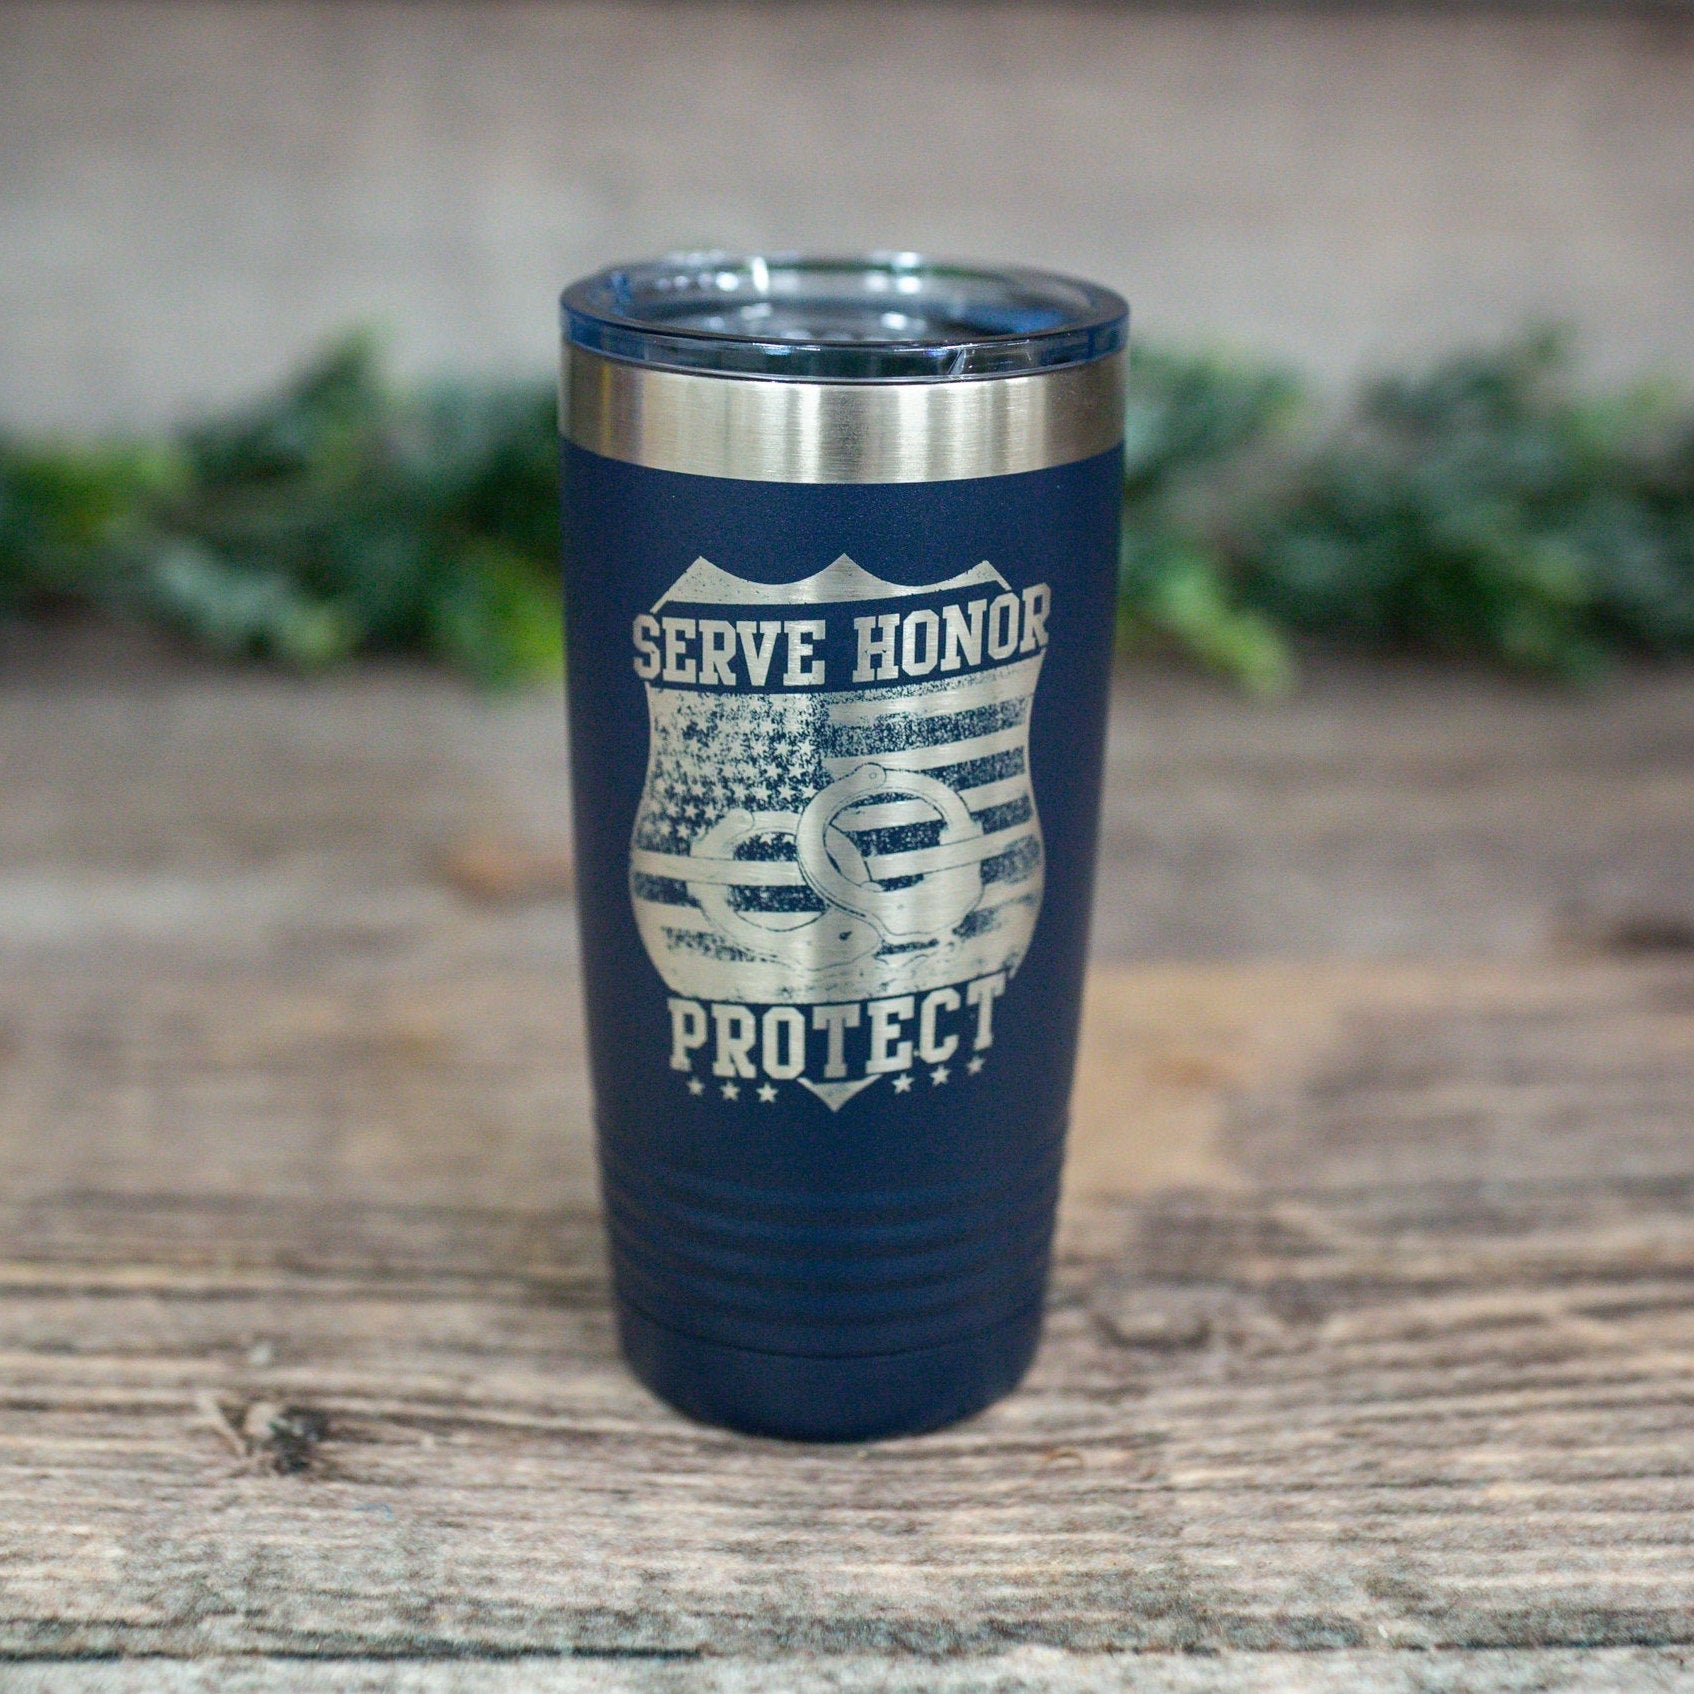 https://3cetching.com/wp-content/uploads/2021/07/serve-honor-protect-engraved-stainless-steel-police-officer-tumbler-police-officer-thank-you-gift-mug-first-responder-gift-60f7331b.jpg